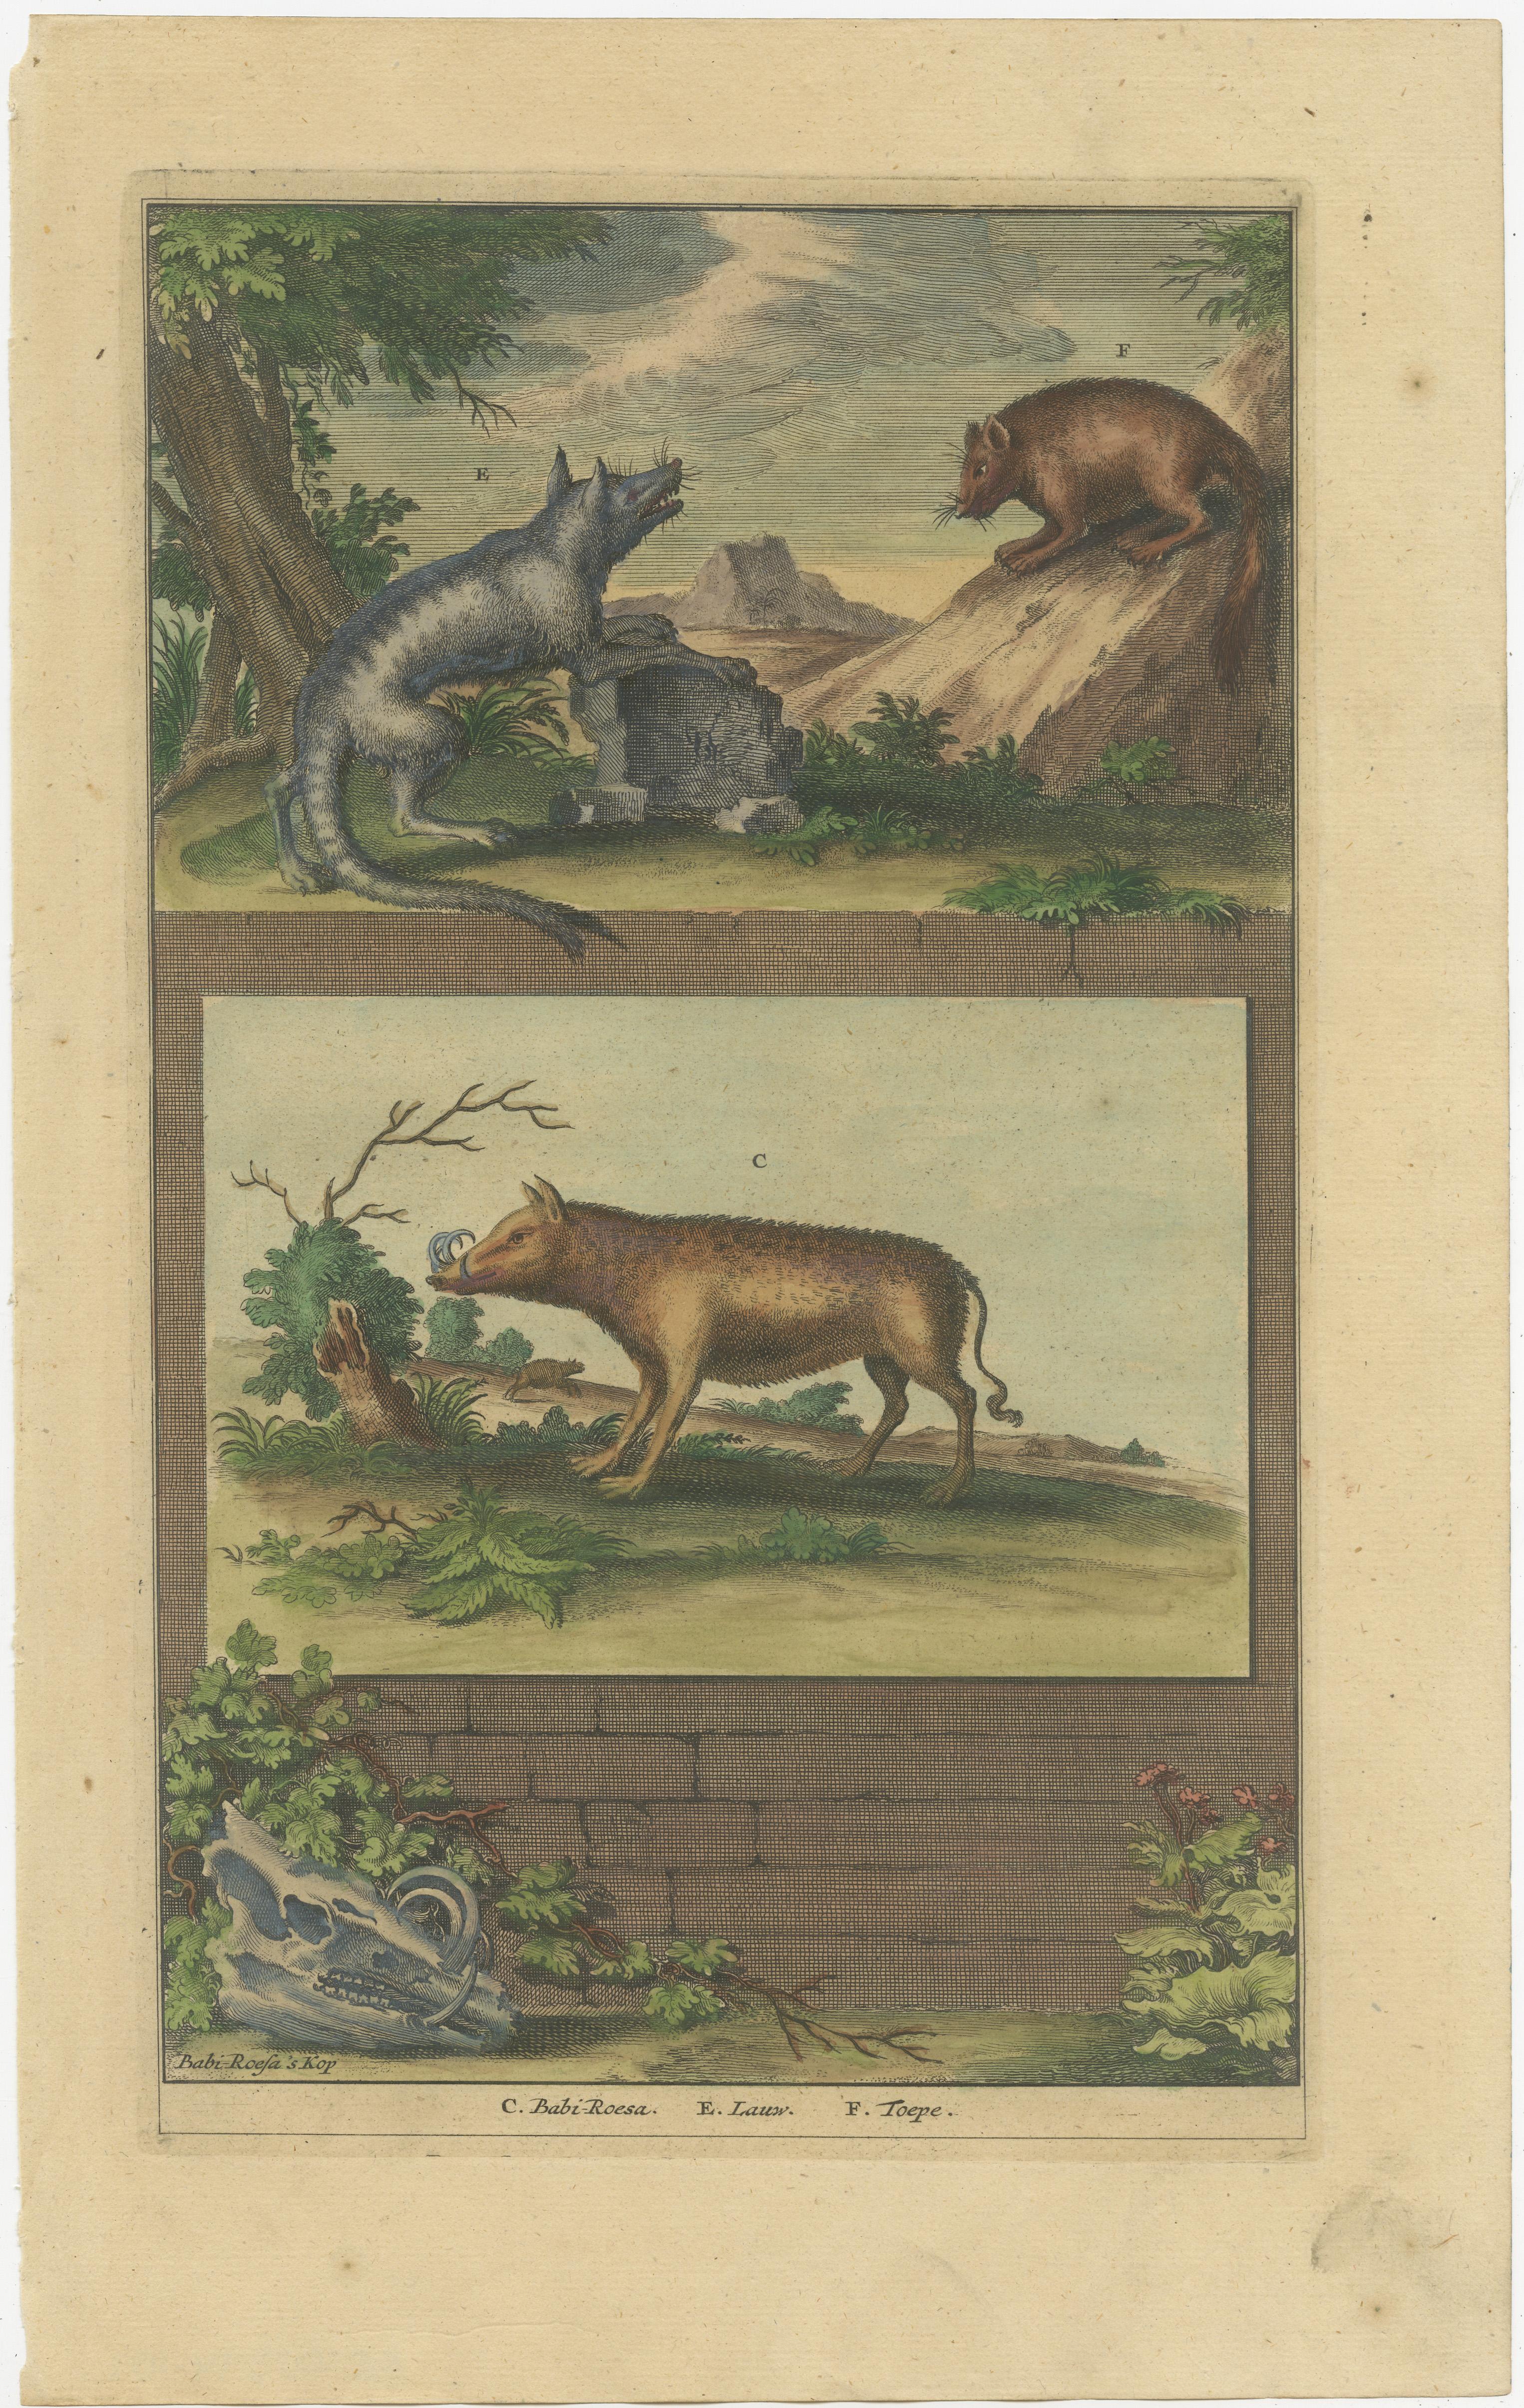 Antique print titled 'c. Babi-Roesa. E. Lauw. F. Toepe'. This print depicts babirusa and two other animals, native to Indonesia. This print originates from 'Oud en Nieuw Oost-Indiën' by F. Valentijn.

François Valentyn or Valentijn (17 April 1666